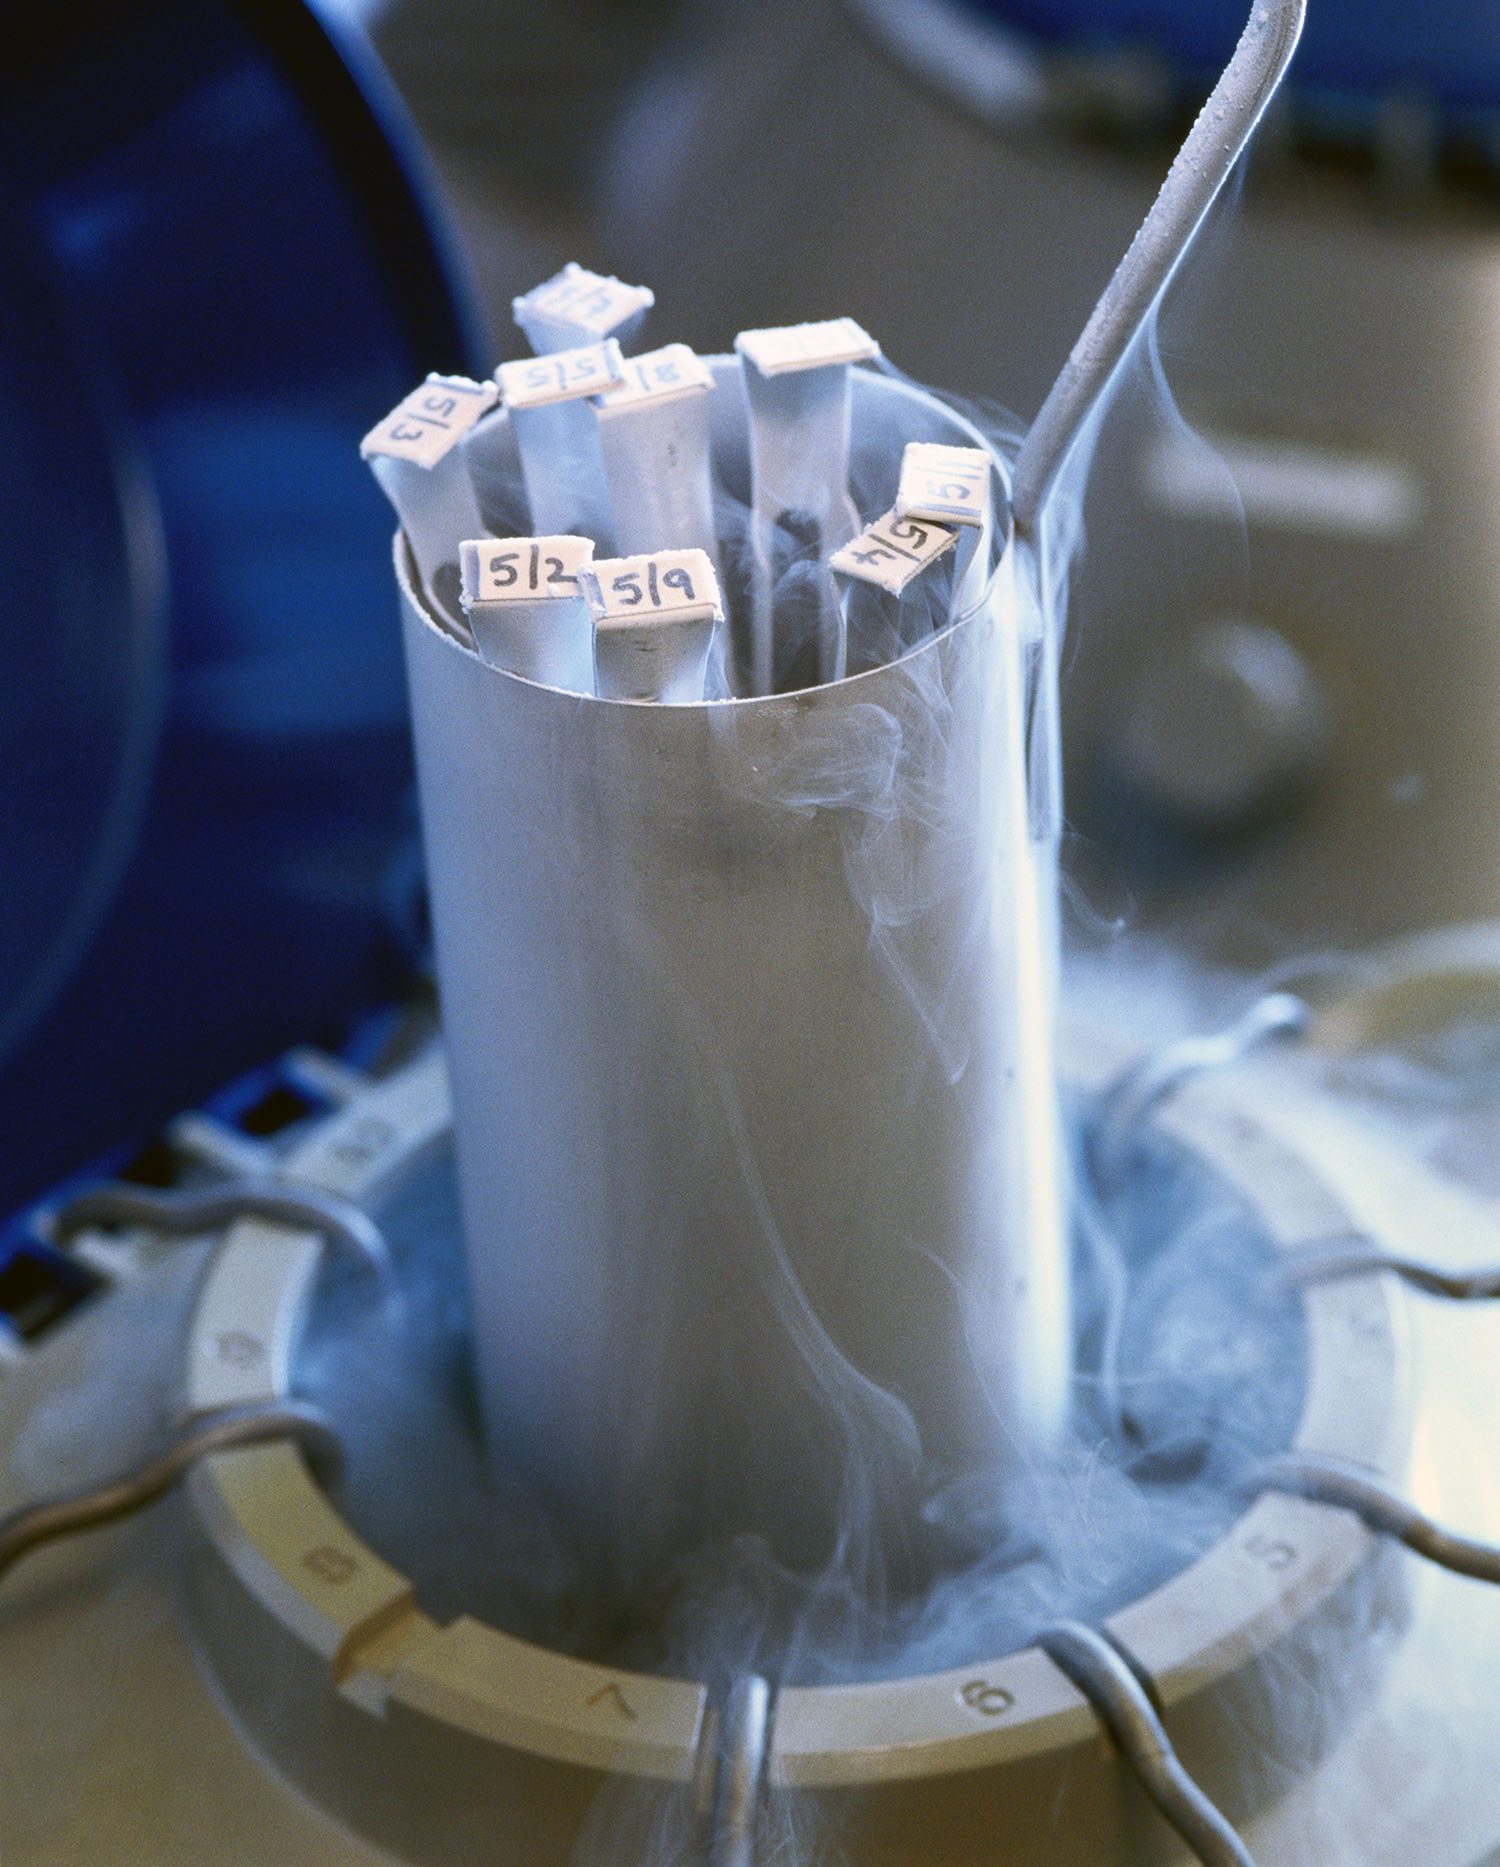 Frozen human embryos being removed from a liquid nitrogen storage.